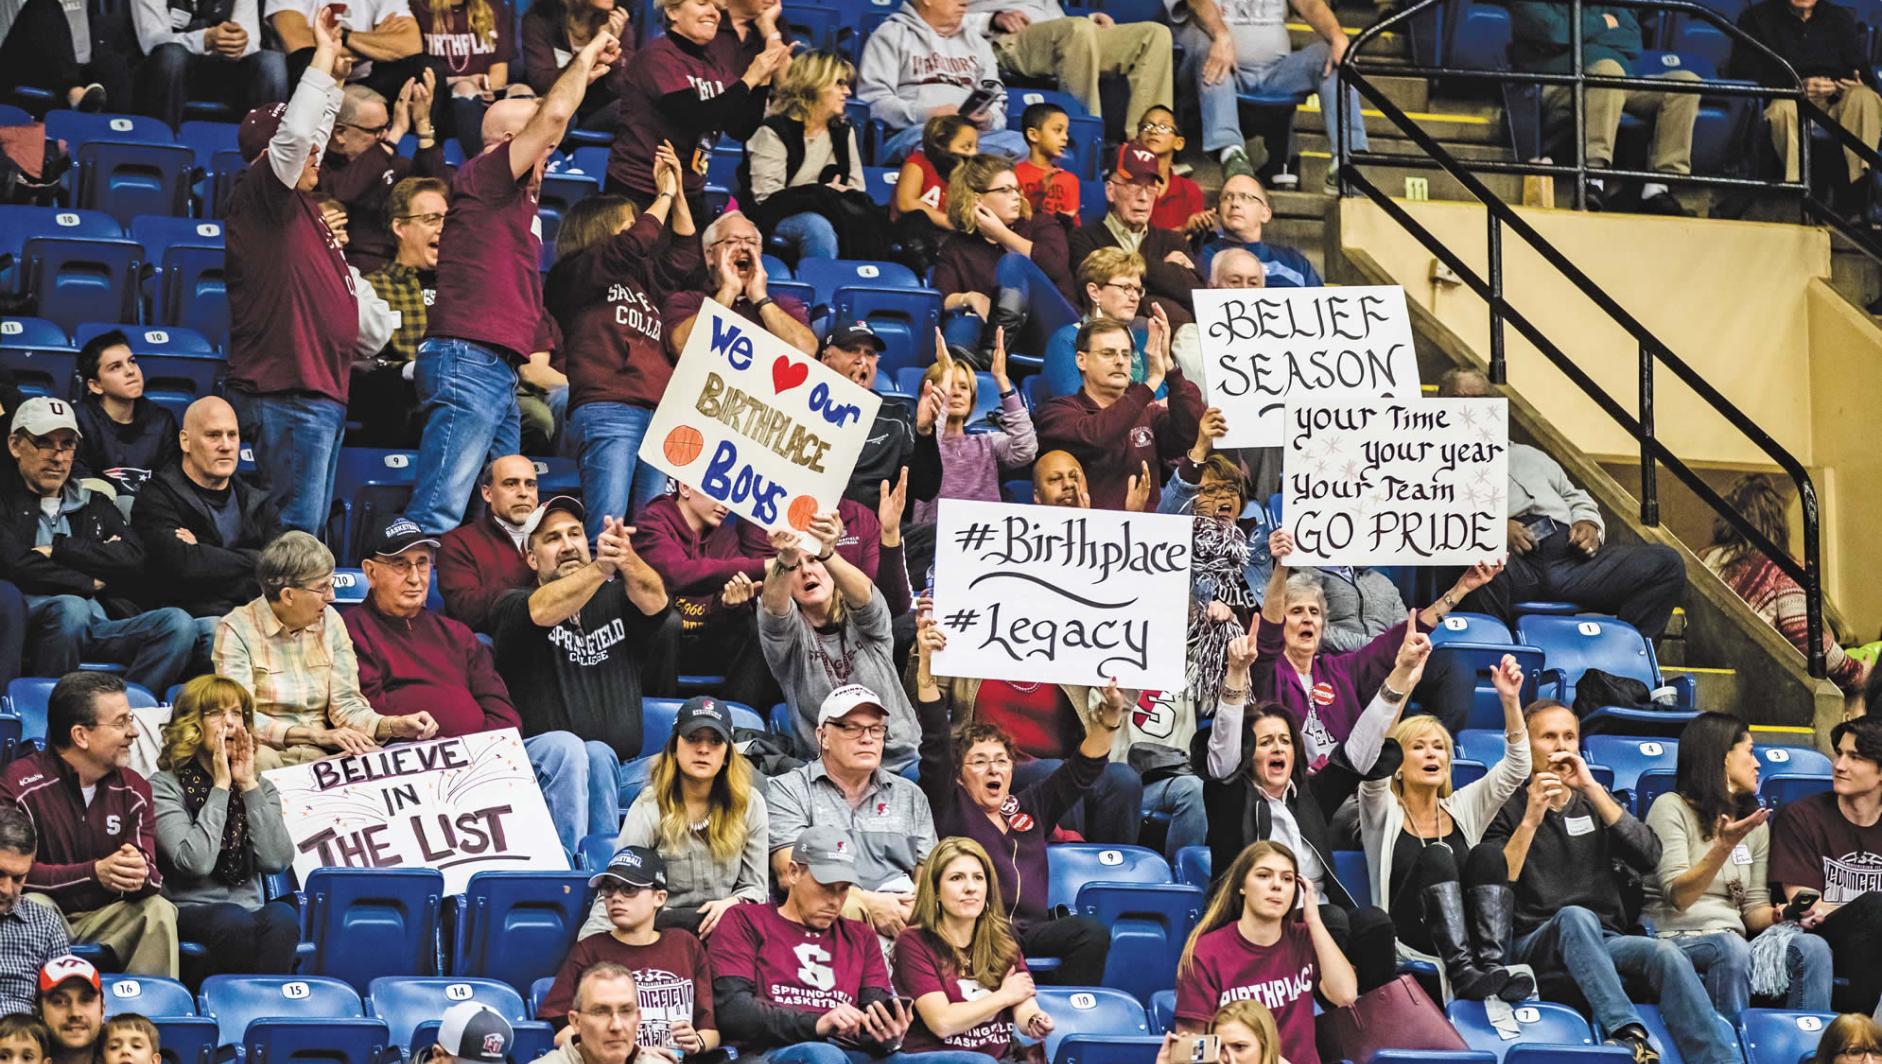 Clockwise from the top, Springfield College alumni, parents, and fans cheer on the Pride at the NCAA semifinals.